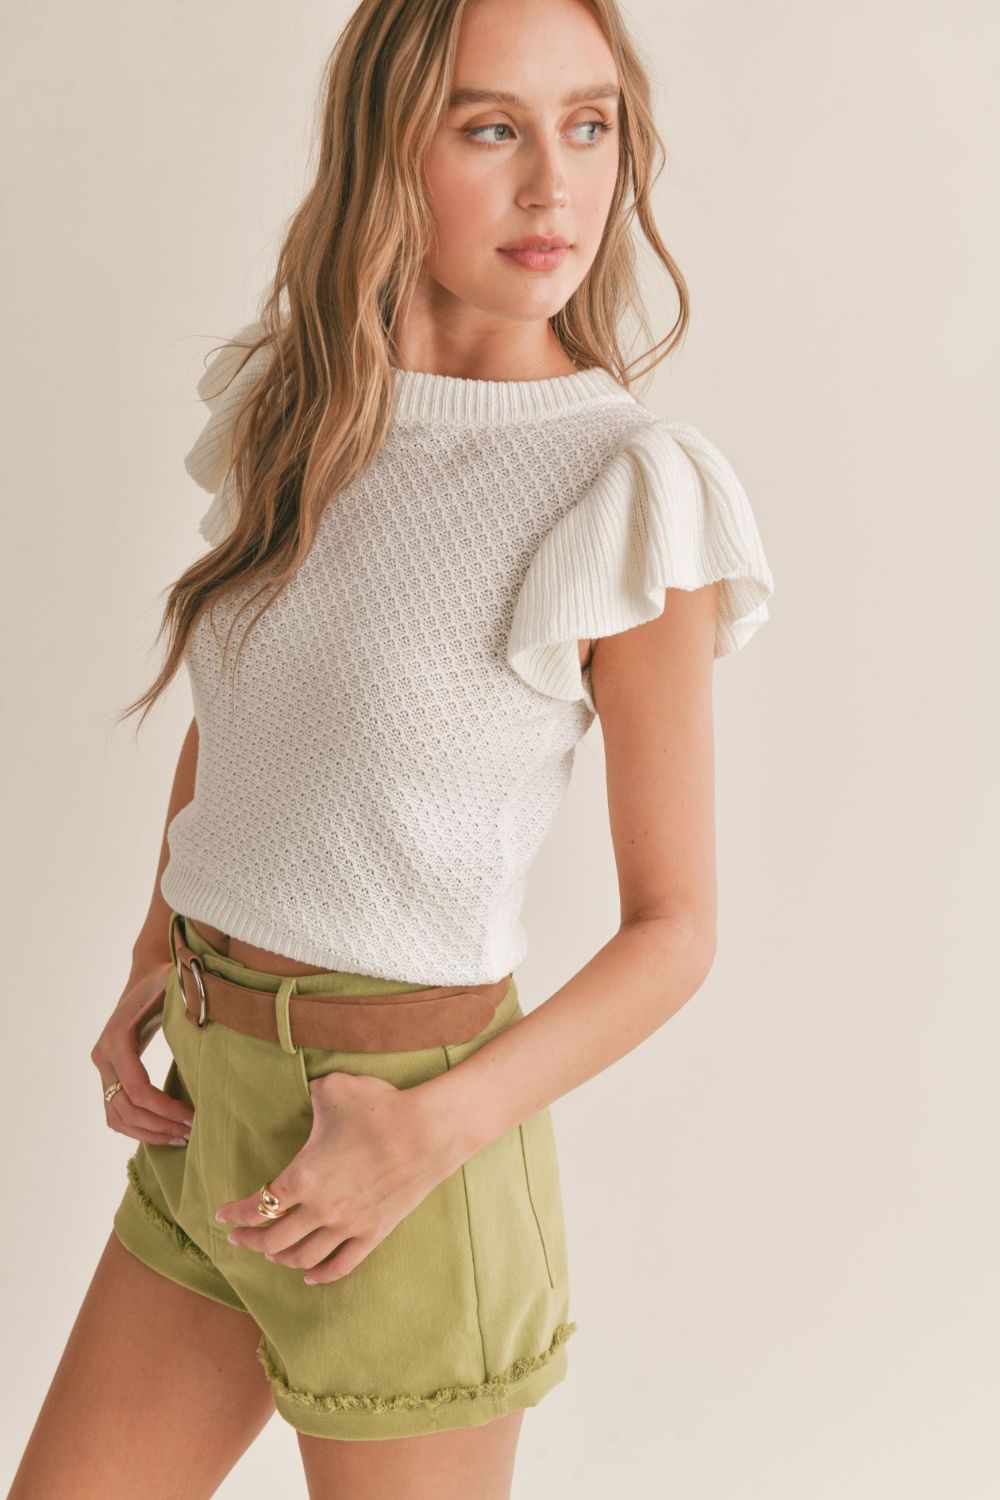 Women&#39;s Spring Ruffle Sleeve Knit Sweater Top | Ivory - Women&#39;s Shirts &amp; Tops - Blooming Daily